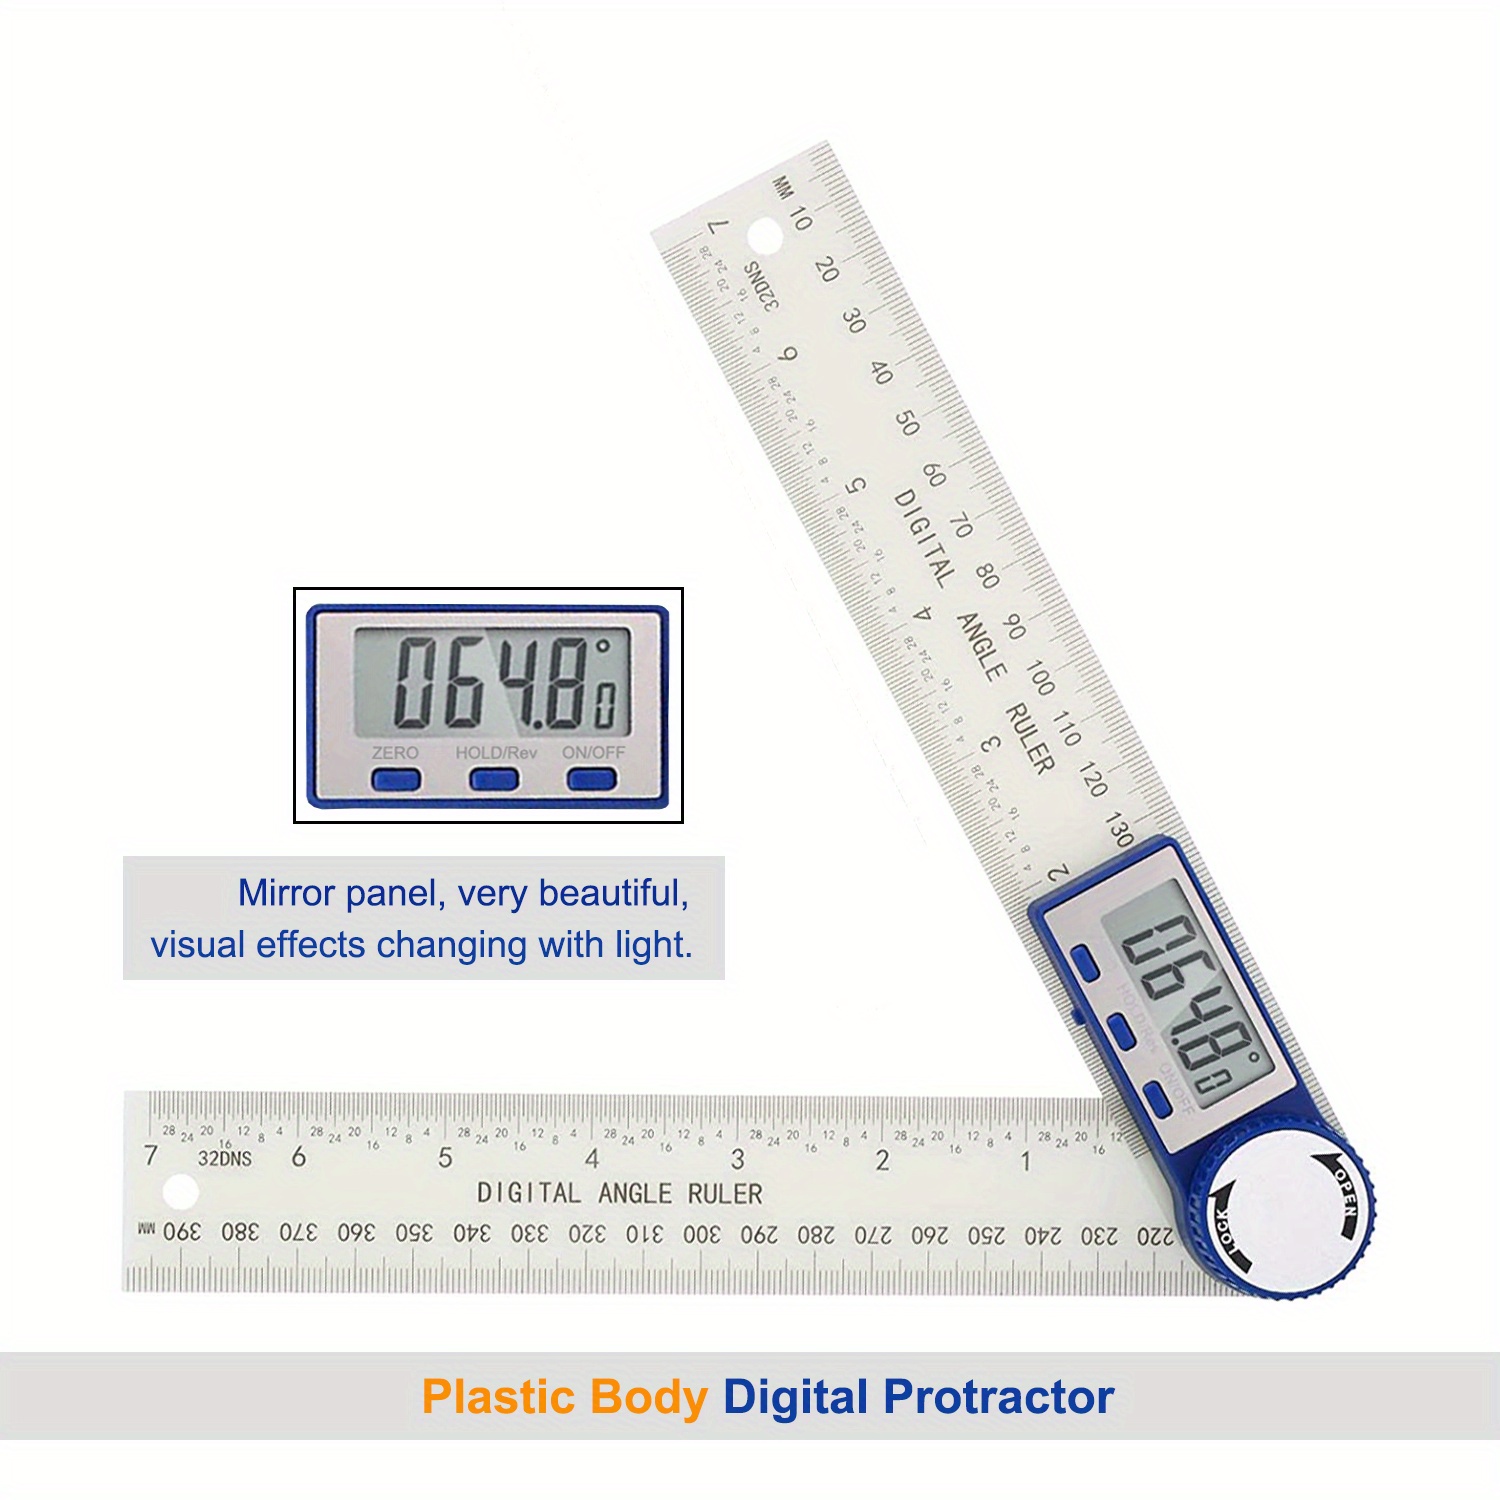 Tbvhomm Digital Angle Finder Protractor, Angle Finder Ruler with 7inch/200mm, Angle Measuring Tool for Woodworking/Carpenter/Construction/DIY